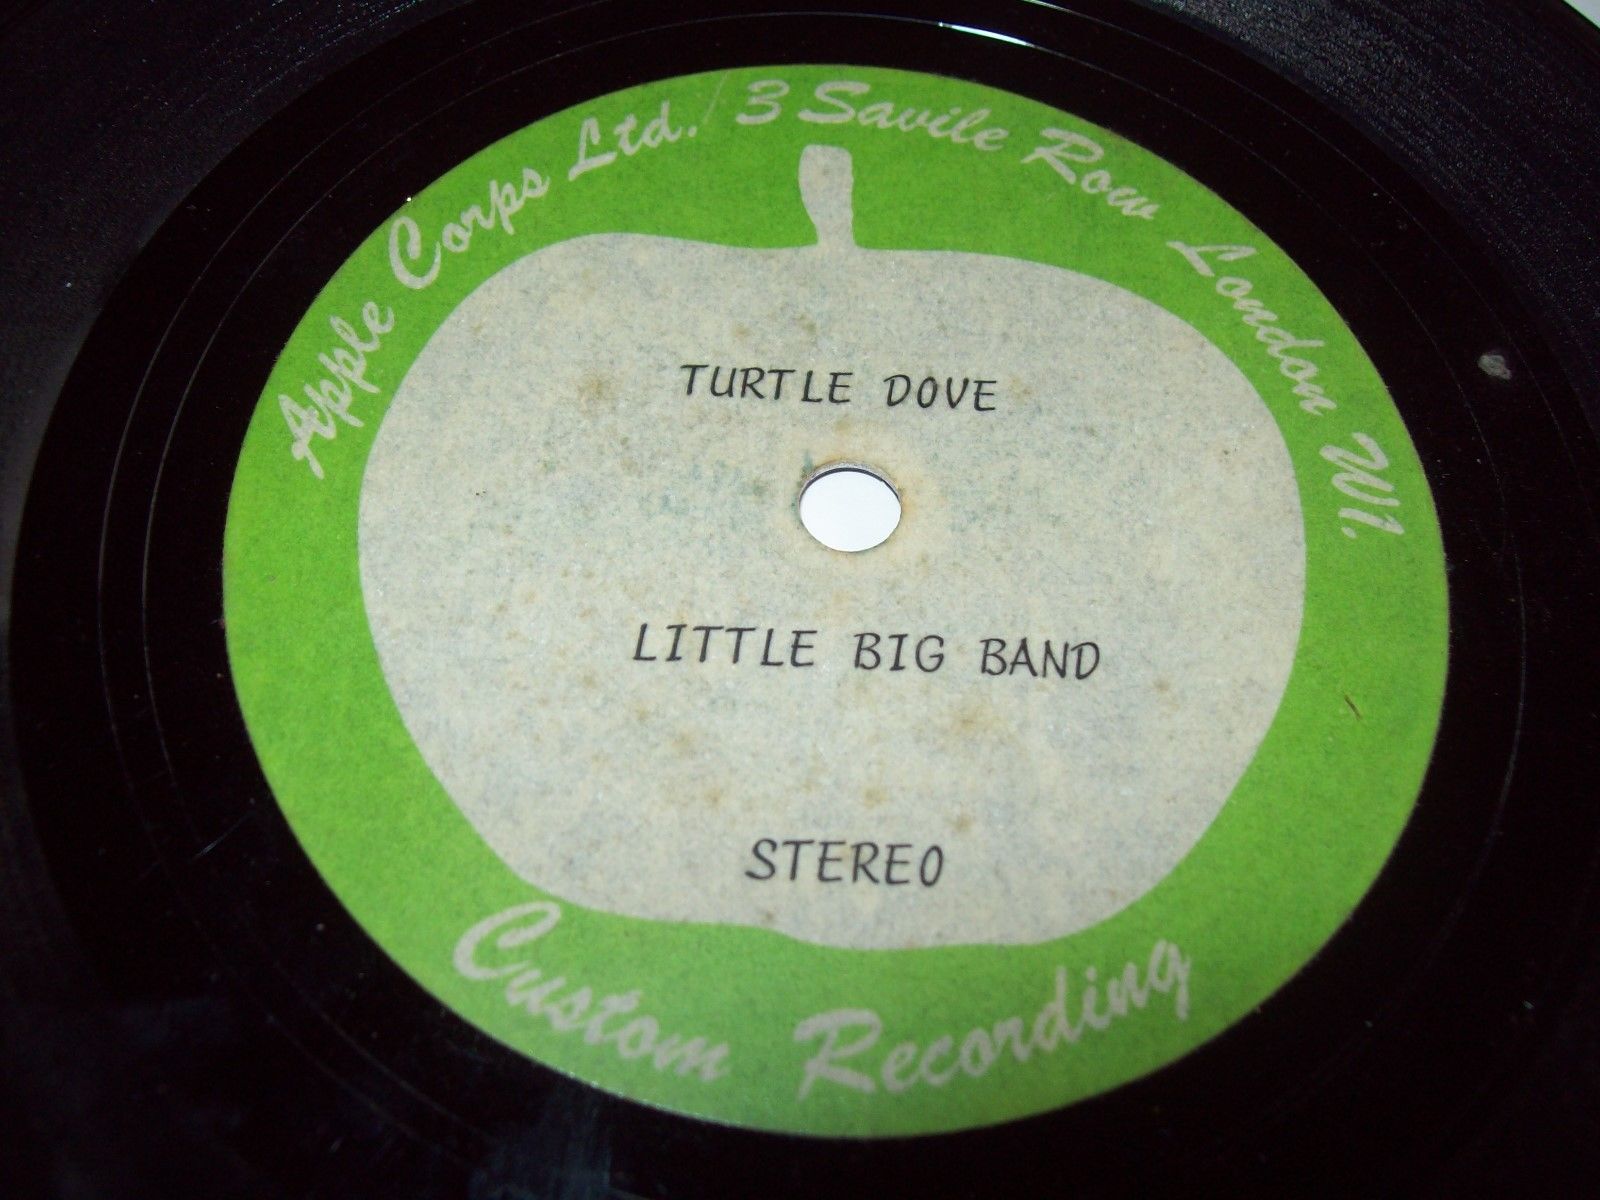 RATS (LITTLE BIG BAND) Turtle dove APPLE Acetate **** THE BEATLES ***GLAM***